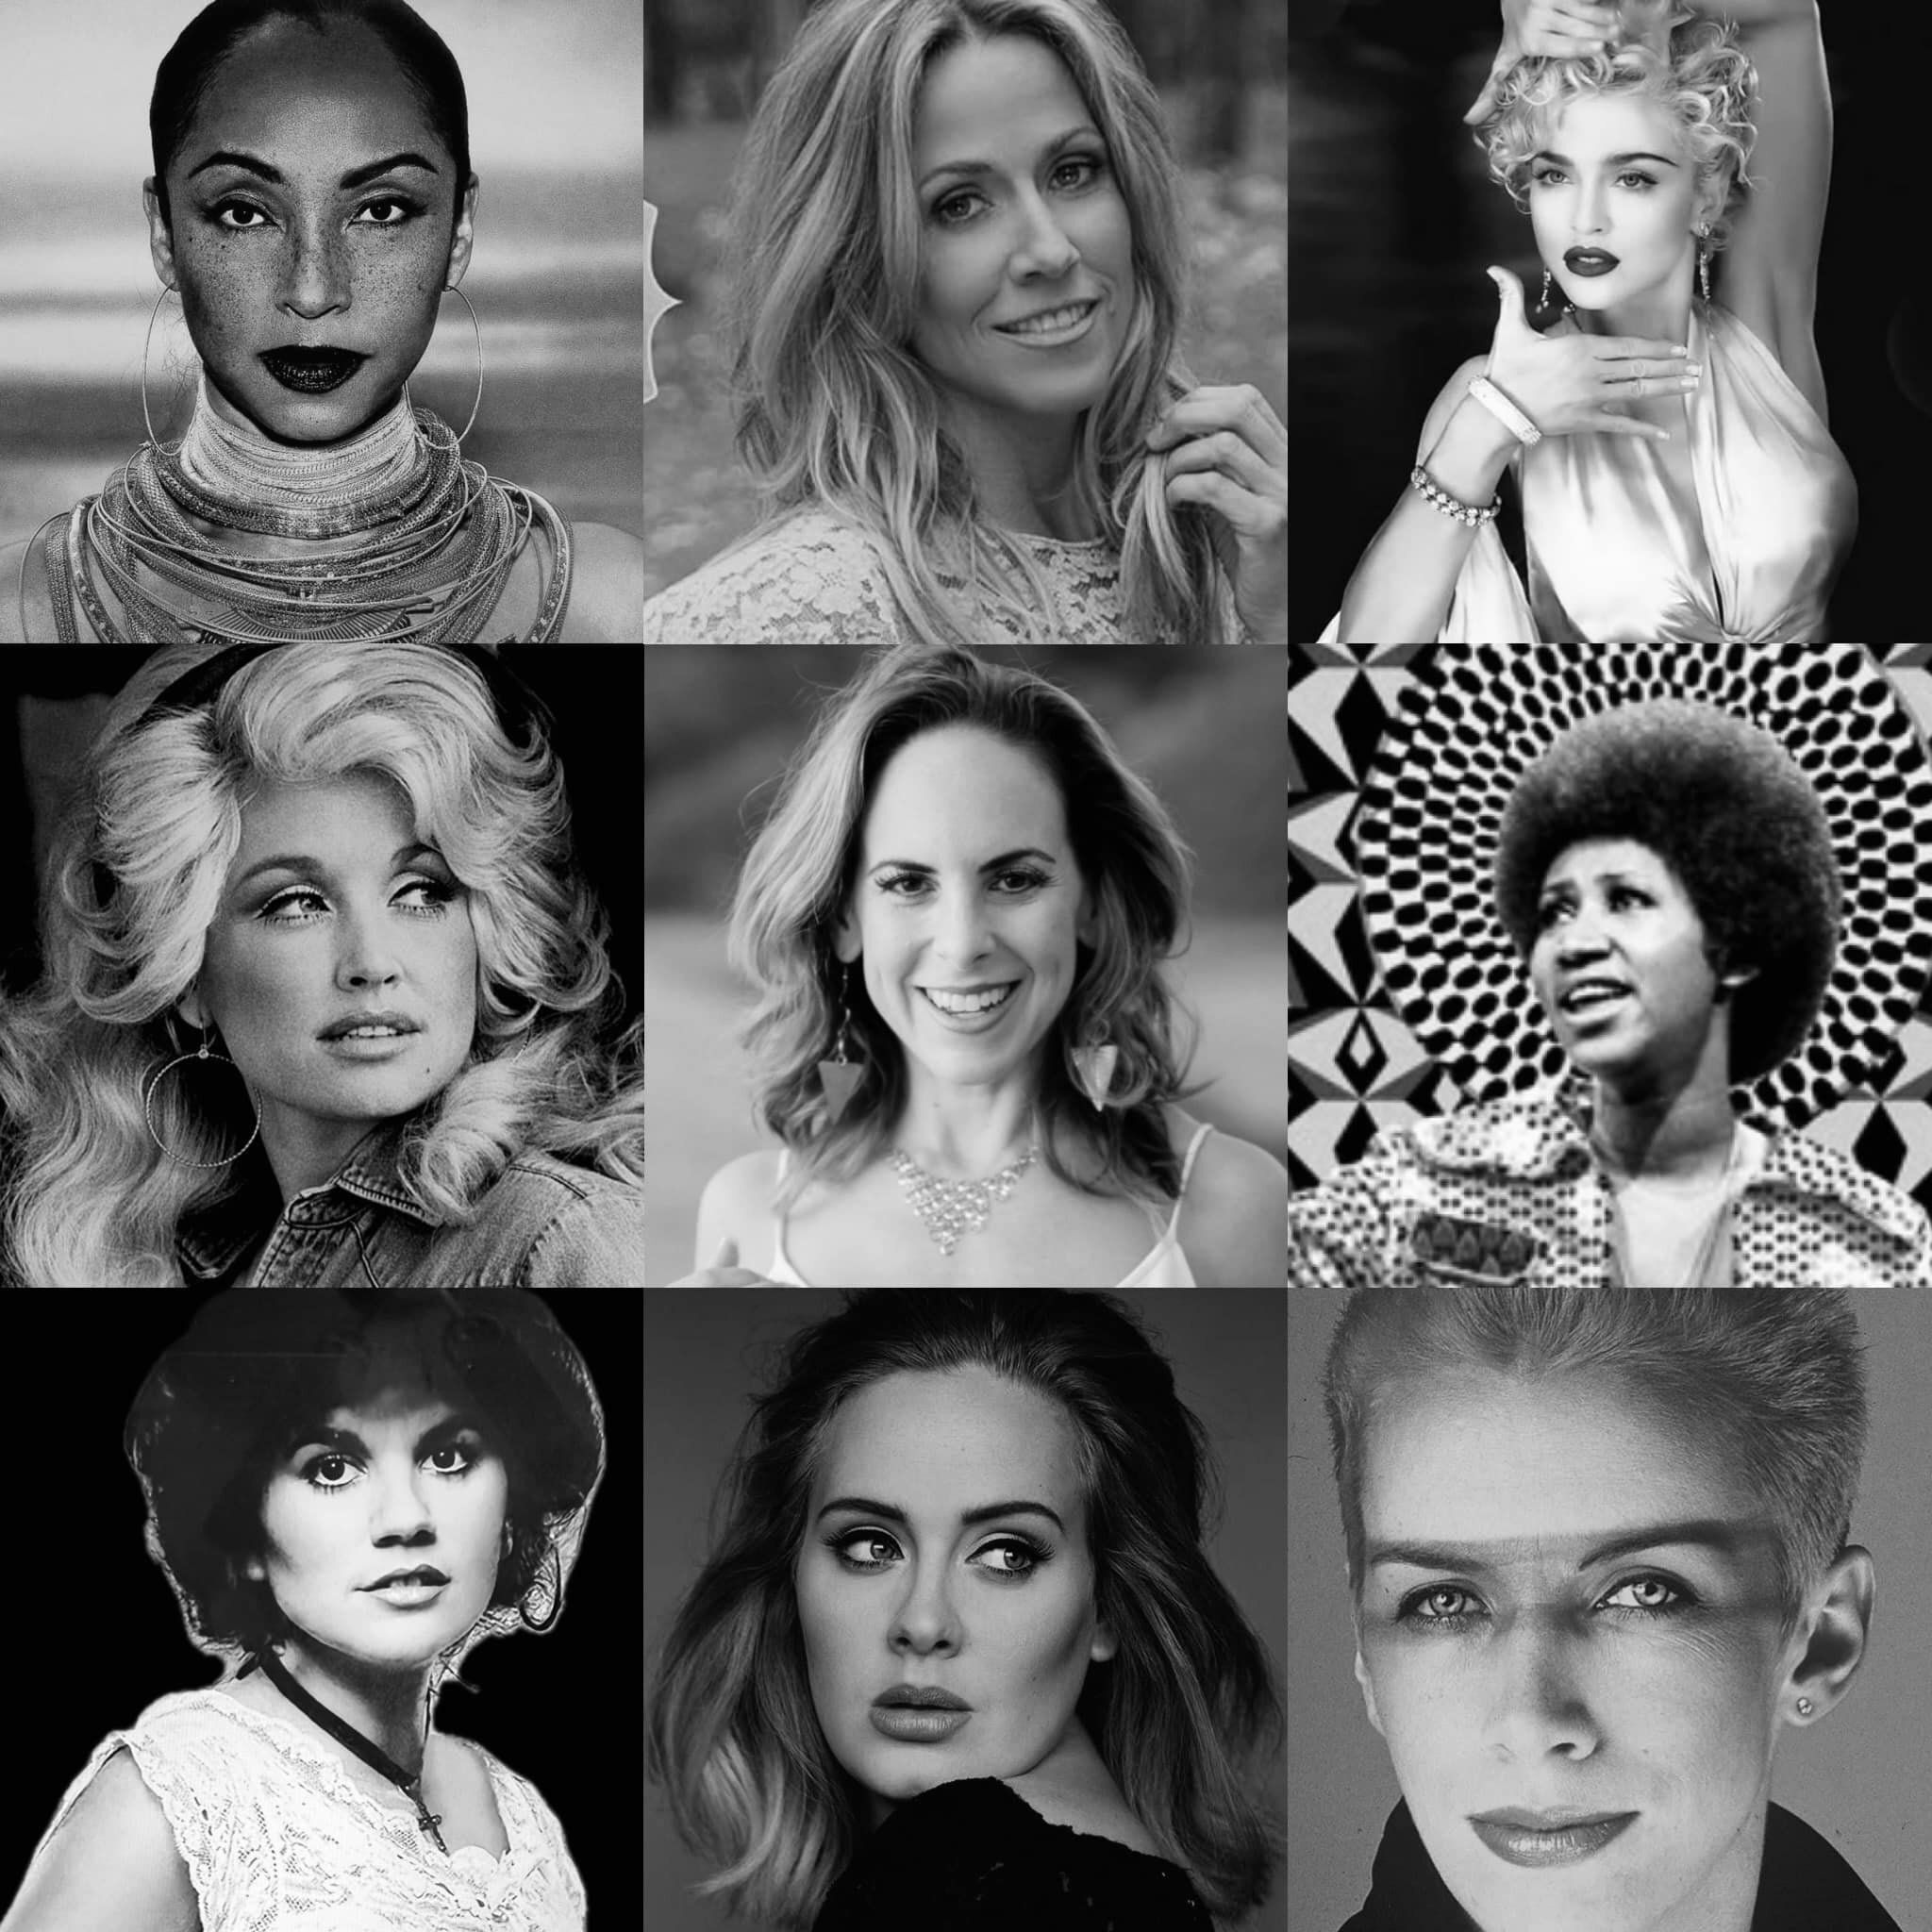 Just a couple of the women I&rsquo;ll be celebrating on April 26 &amp; 27. In my new show &ldquo;Women&rsquo;s Work&rdquo;
At The Pheasantry  Jazz Club, Chelsea London

I&rsquo;ve been singing for 40 years- (I know , the math doesn&rsquo;t work out) 